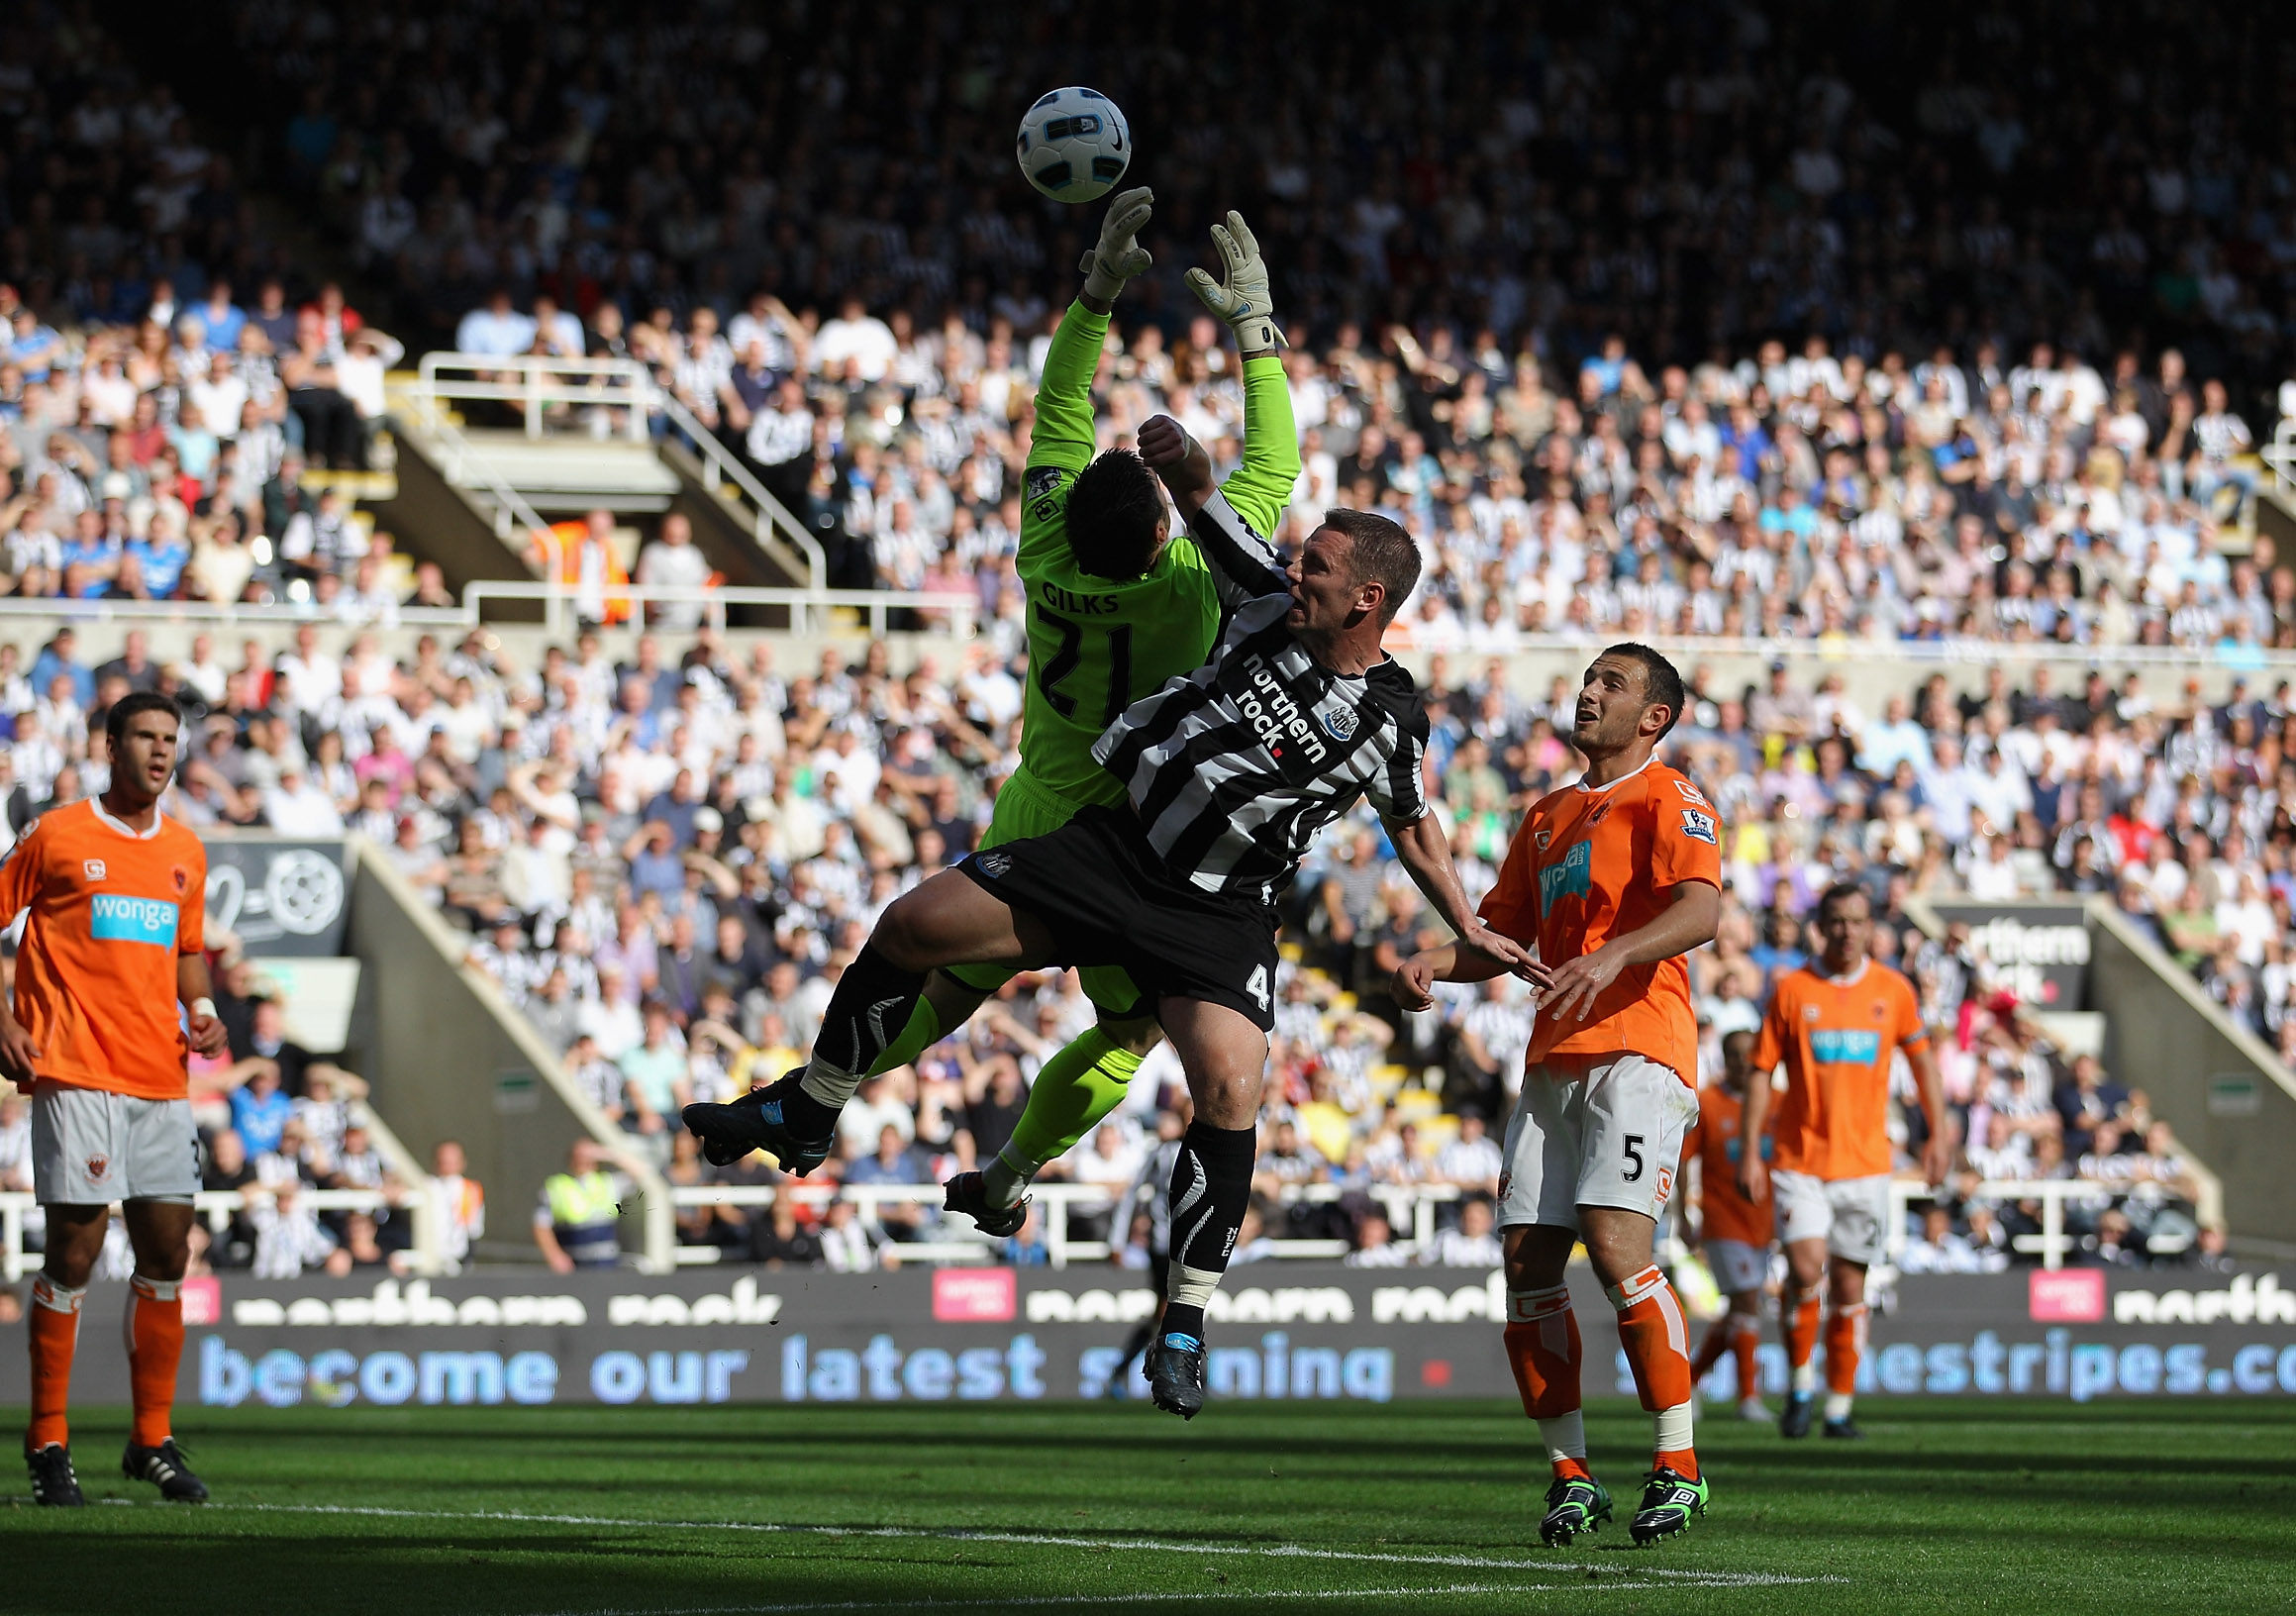 NEWCASTLE UPON TYNE, ENGLAND - SEPTEMBER 11:  Blackpool goalkeeper Matthew Gilks saves from Kevin Nolan during the Barclays Premier League match between Newcastle United and Blackpool at St James' Park on September 11, 2010 in Newcastle upon Tyne, England